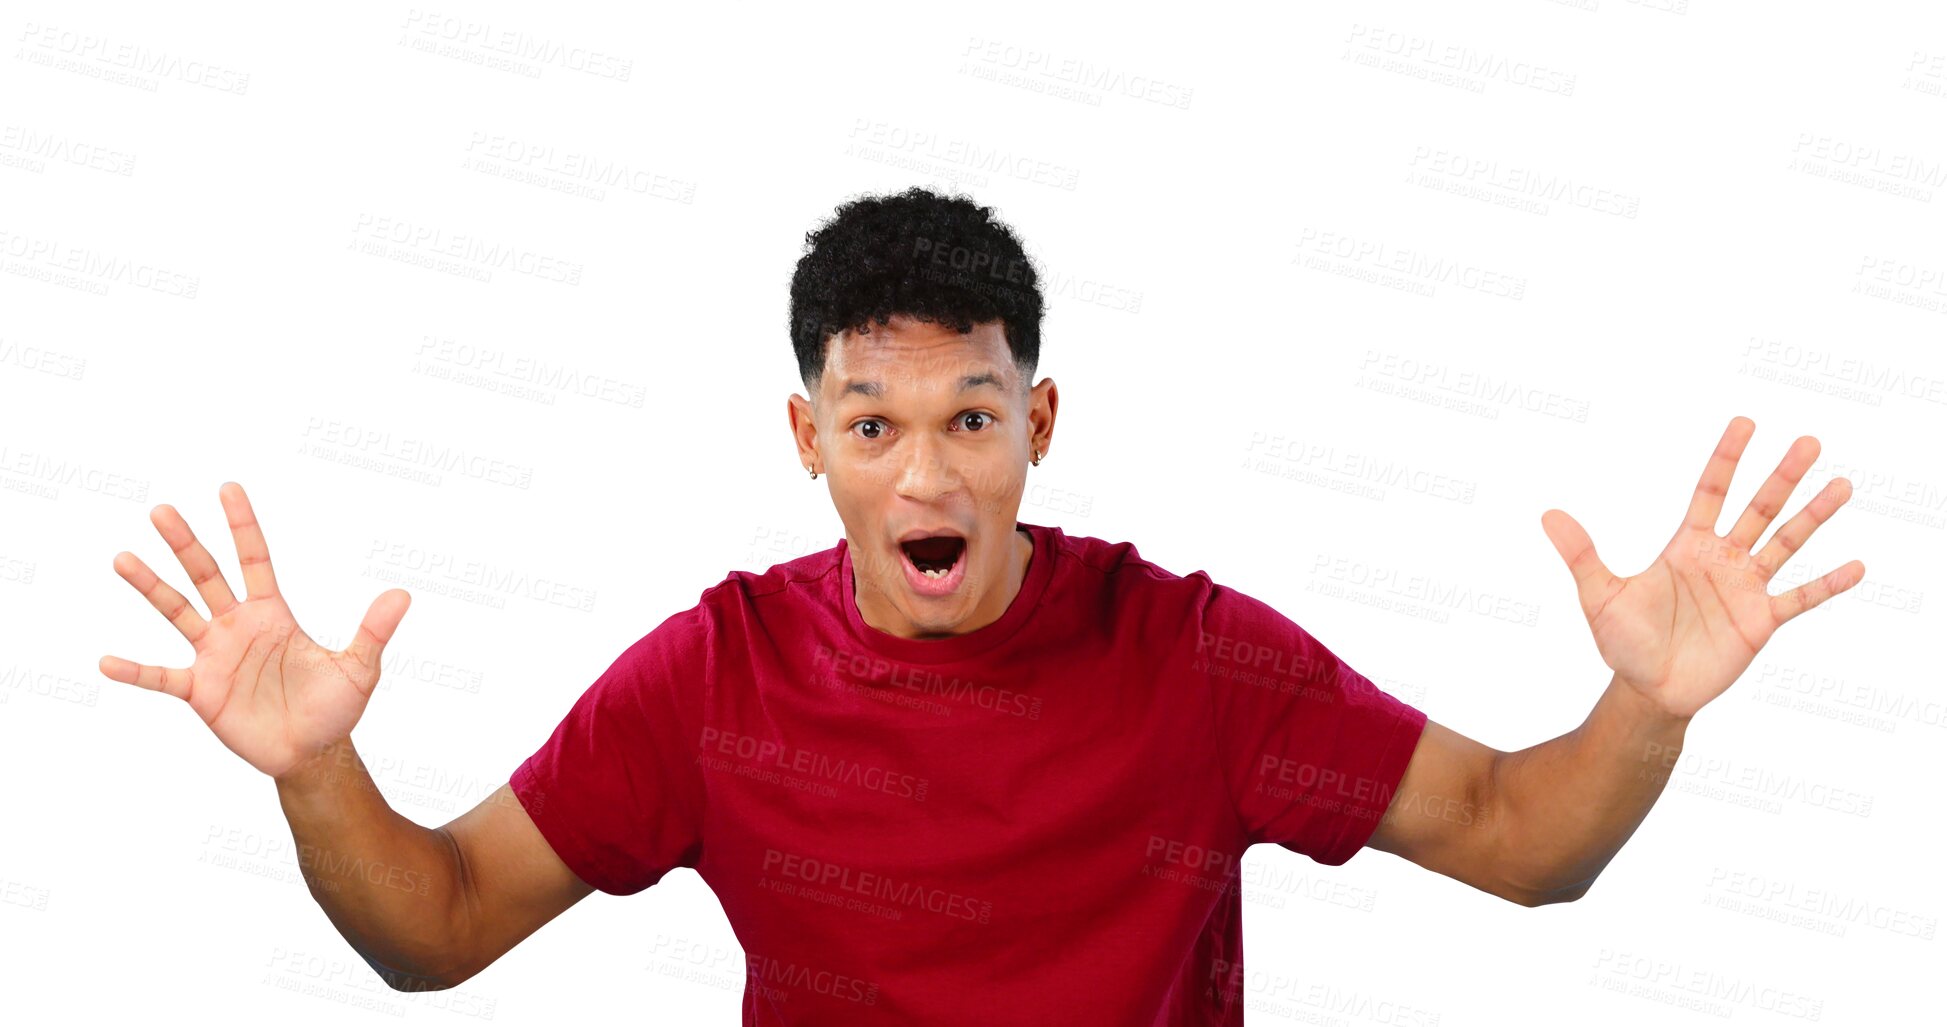 Buy stock photo Man, surprise and excited for celebration, portrait and happy for good news isolated on a transparent png background. Energy, winning and wow for achievement, success and cheers for bonus promotion